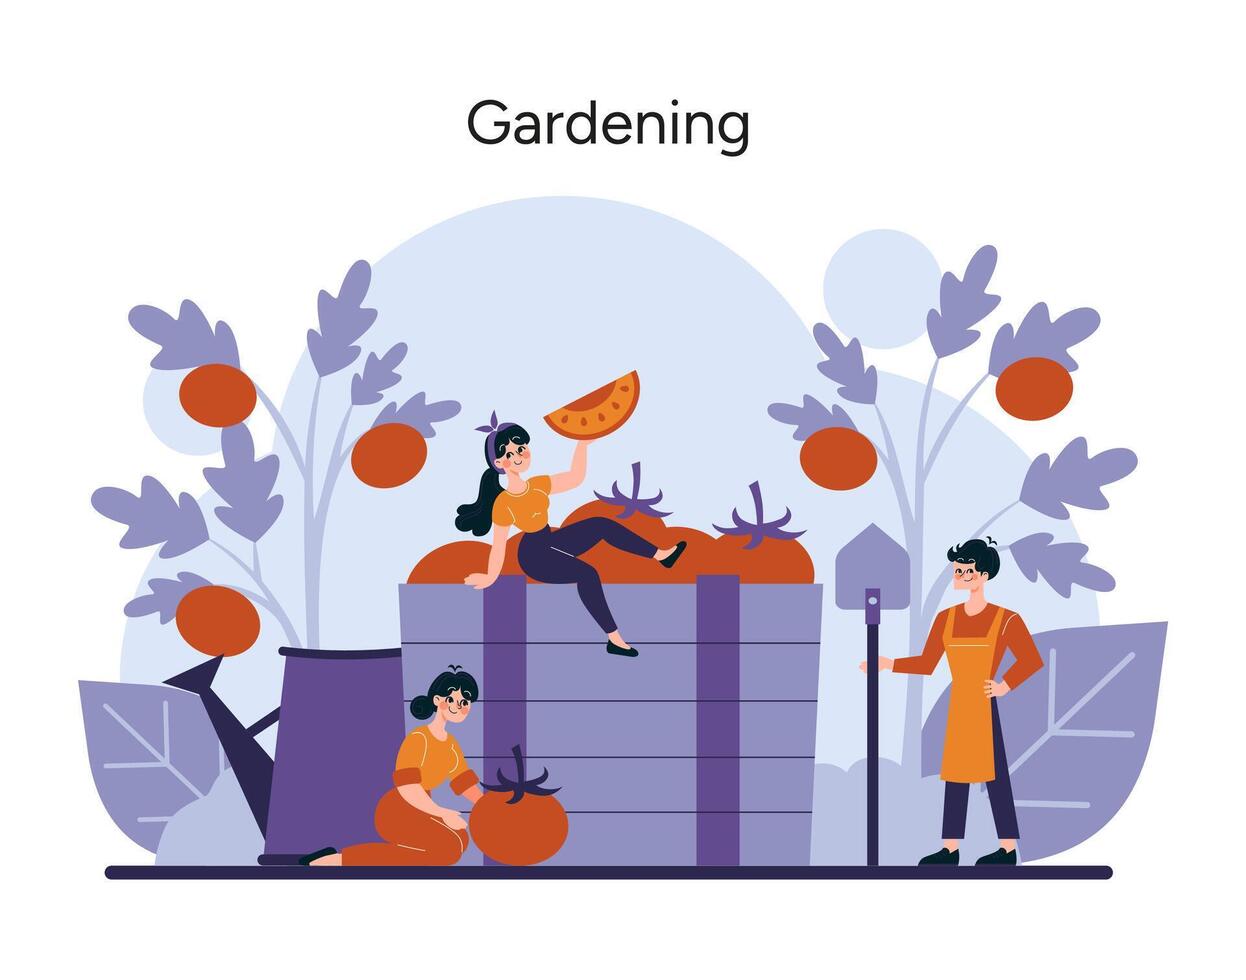 A vibrant scene unfolds as cheerful gardeners engage in the meticulous care of their lush vegetable garden vector